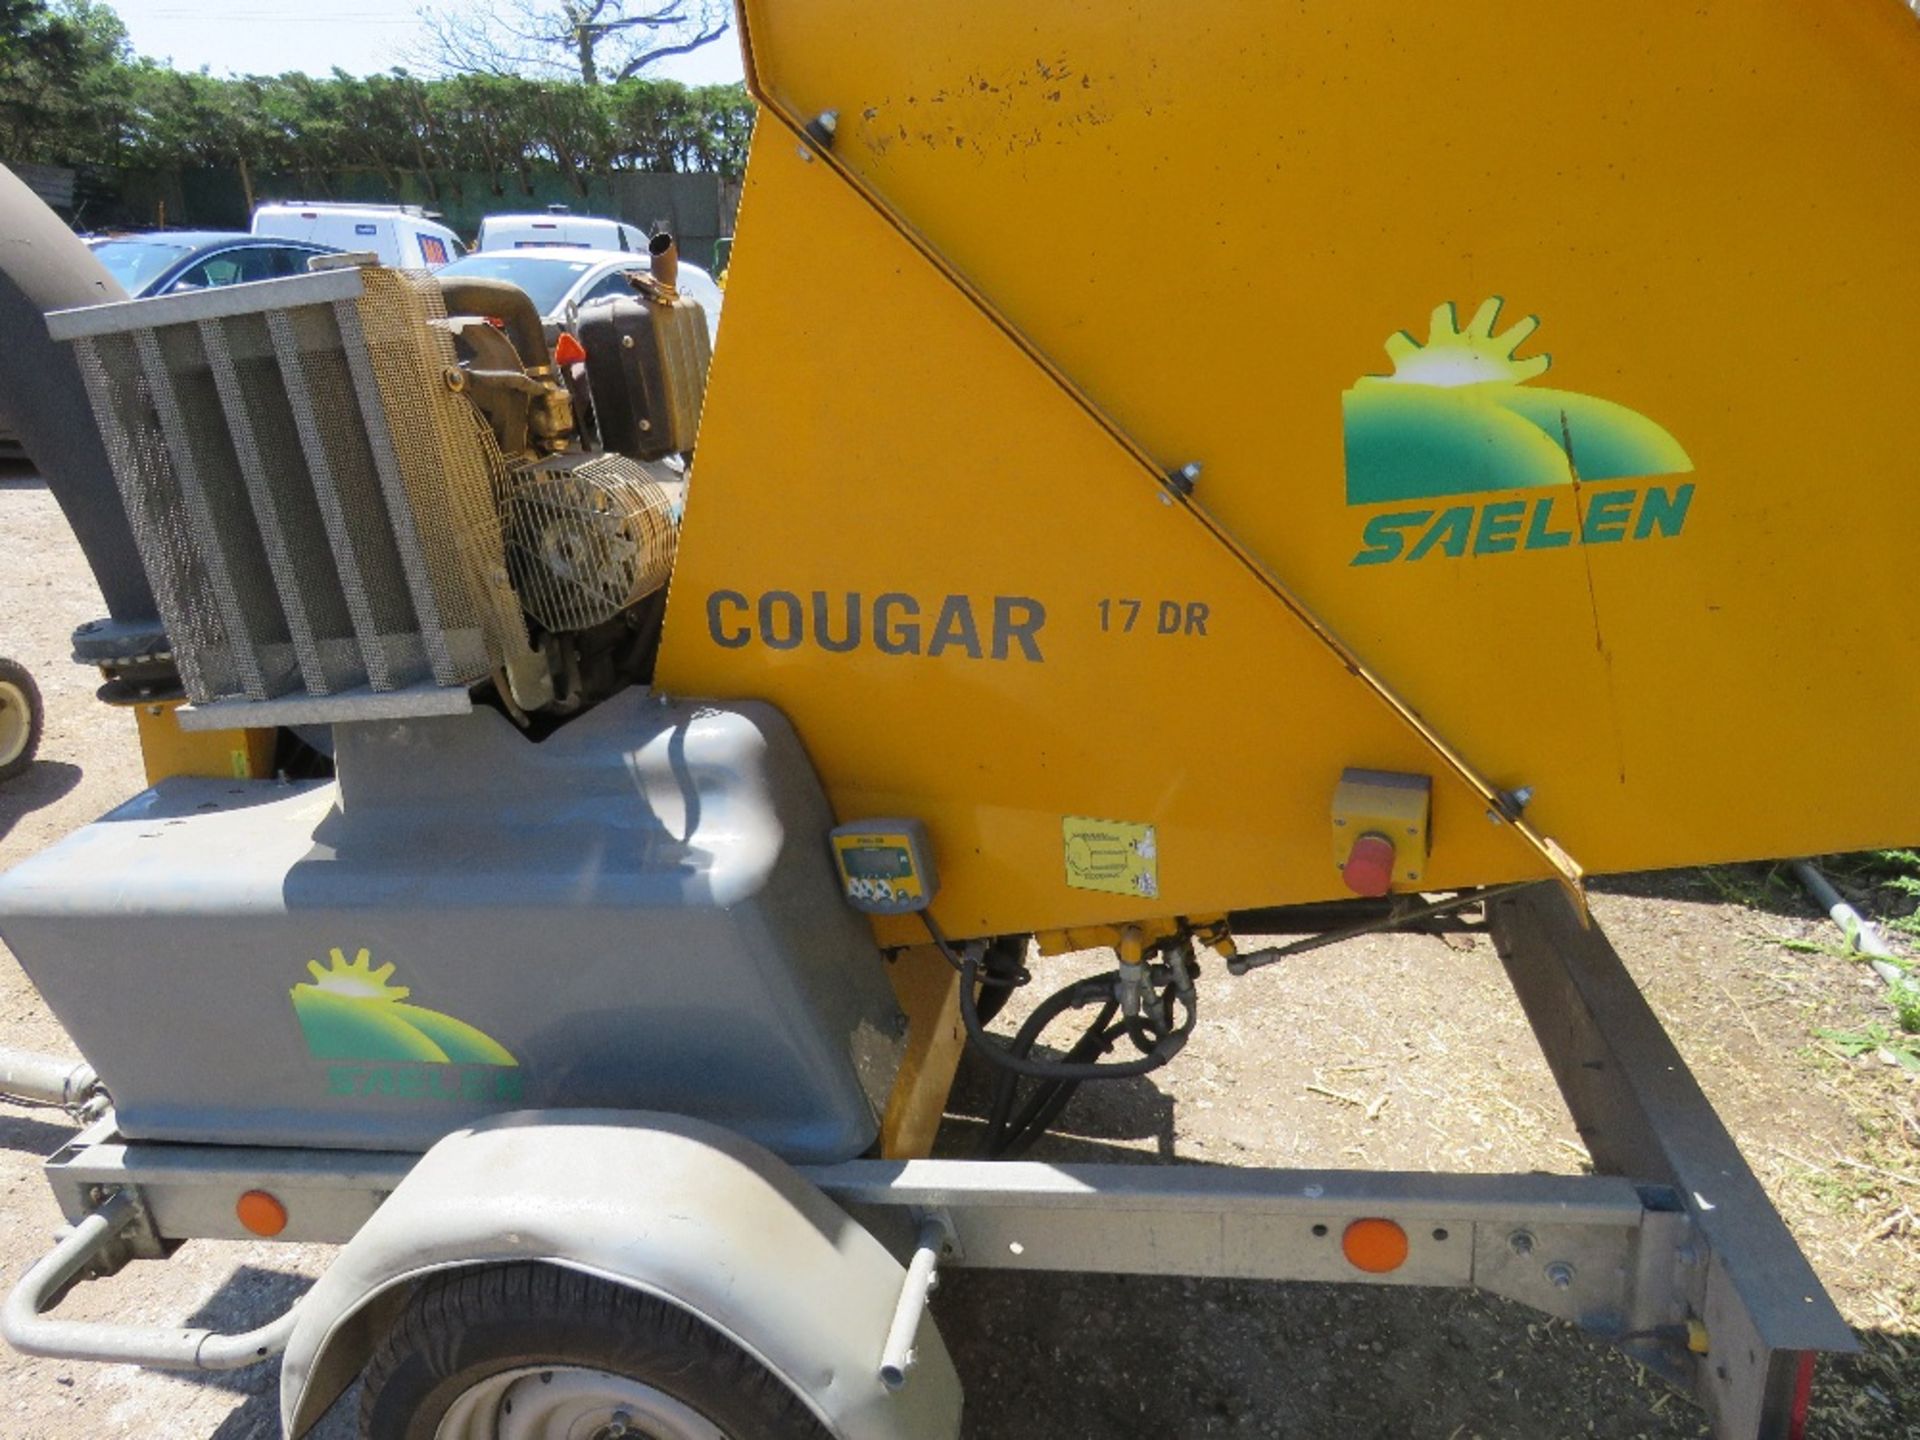 SAELEN COUGAR DR17 EVO DIESEL ENGINED CHIPPER, YEAR 2011. 251 REC HOURS. SN:11101. WHEN TESTED WAS S - Image 7 of 7